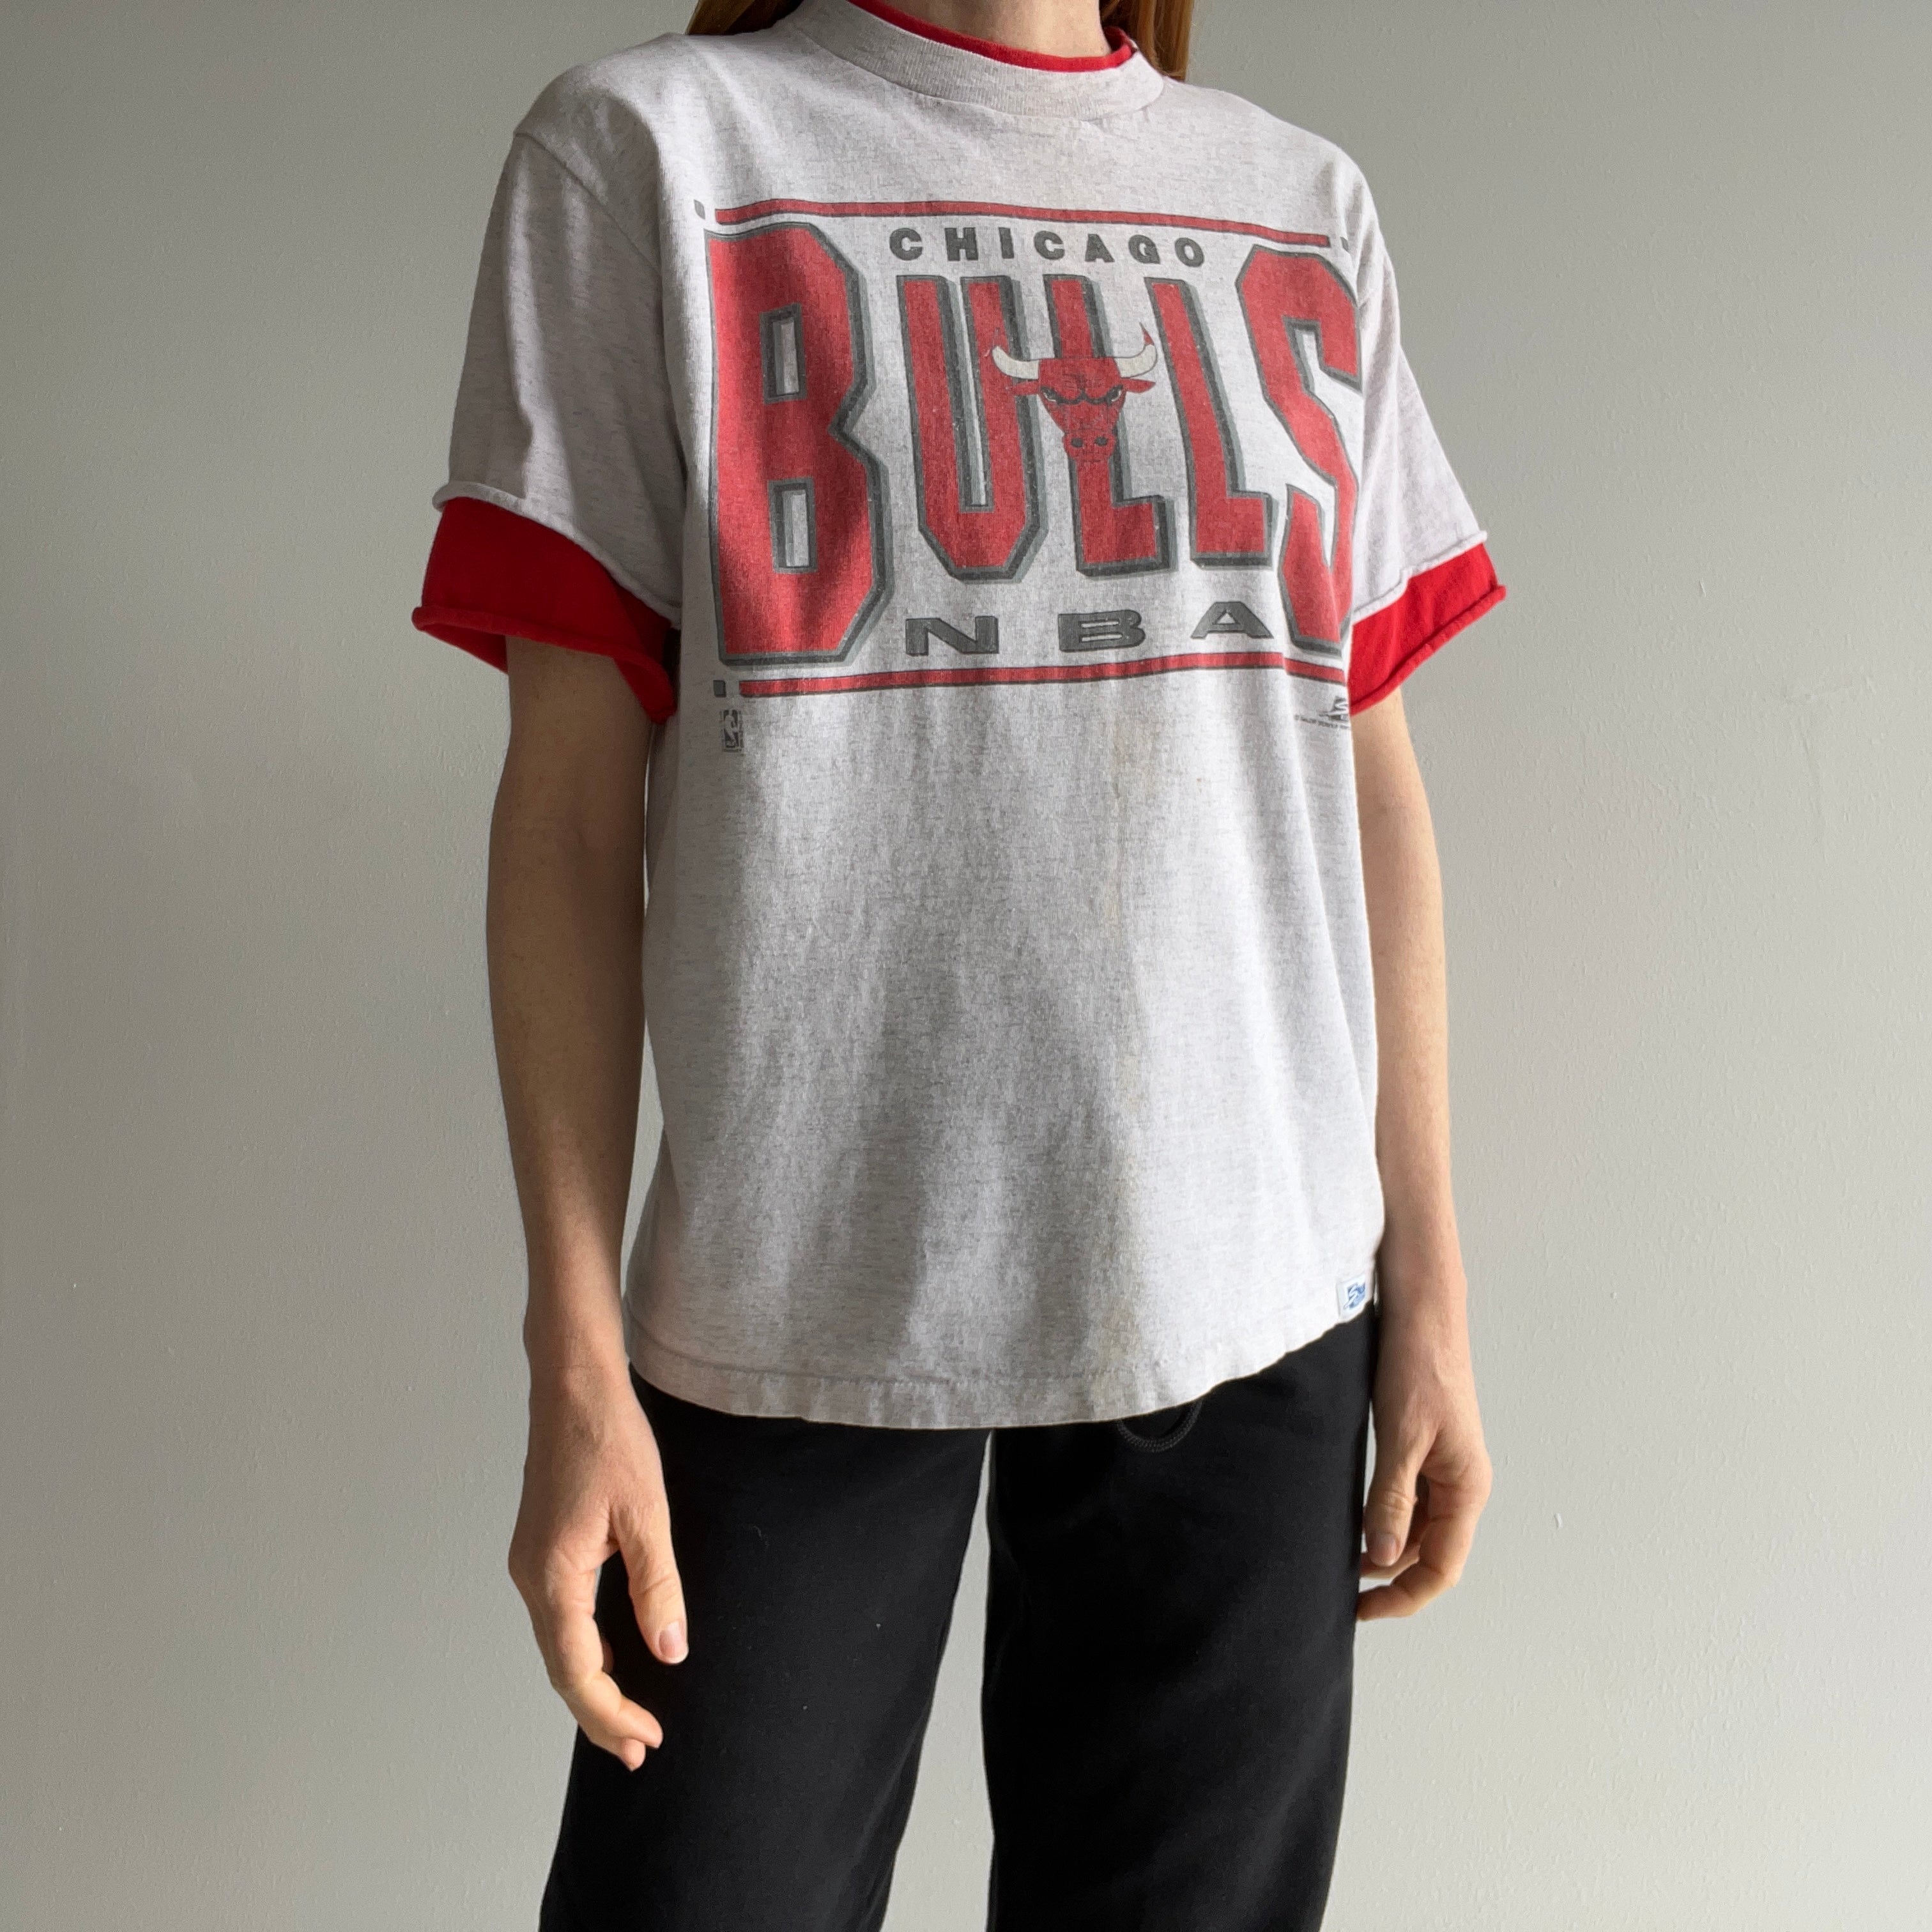 1991 Chicago Bulls Stained Cotton T-Shirt